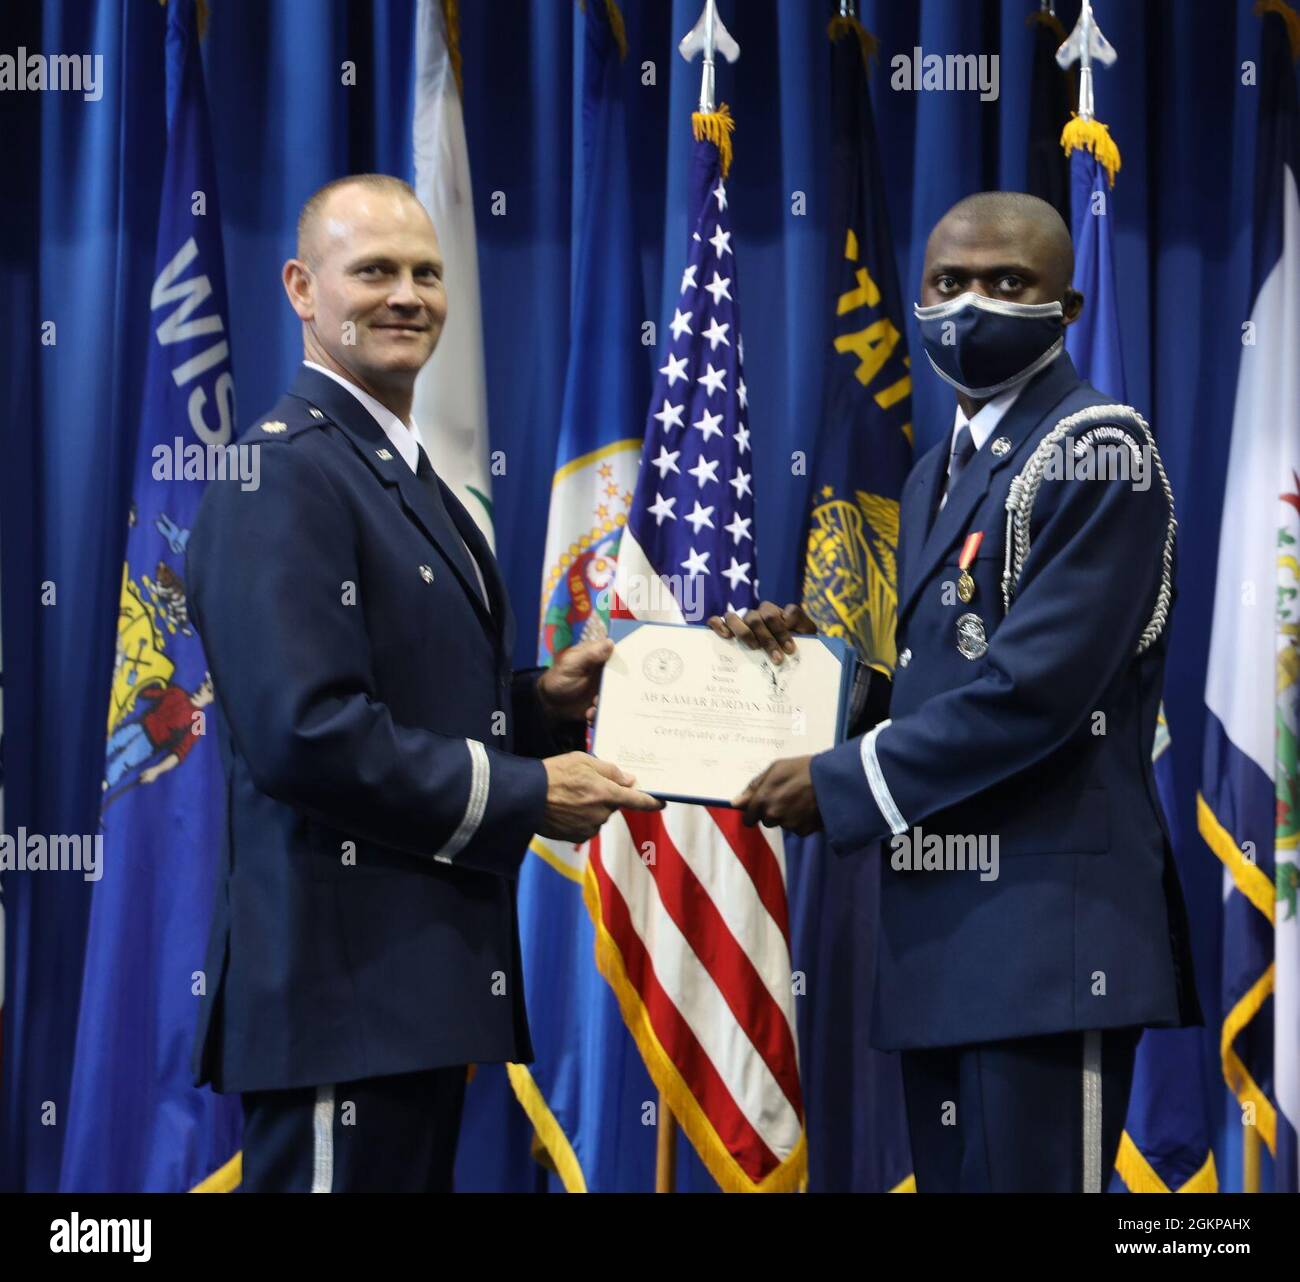 Lt. Col. Jason Woodruff, commander of the United States Air Force Honor Guard, presented graduation certificates to the new graduates of the United States Air Force Honor Guard at Joint Base Anacostia-Bolling, Washington, D.C, June 11, 2021. Airman Basic Kamar Jordan Mills received his graduation certificate for completing the eight-week training. Stock Photo